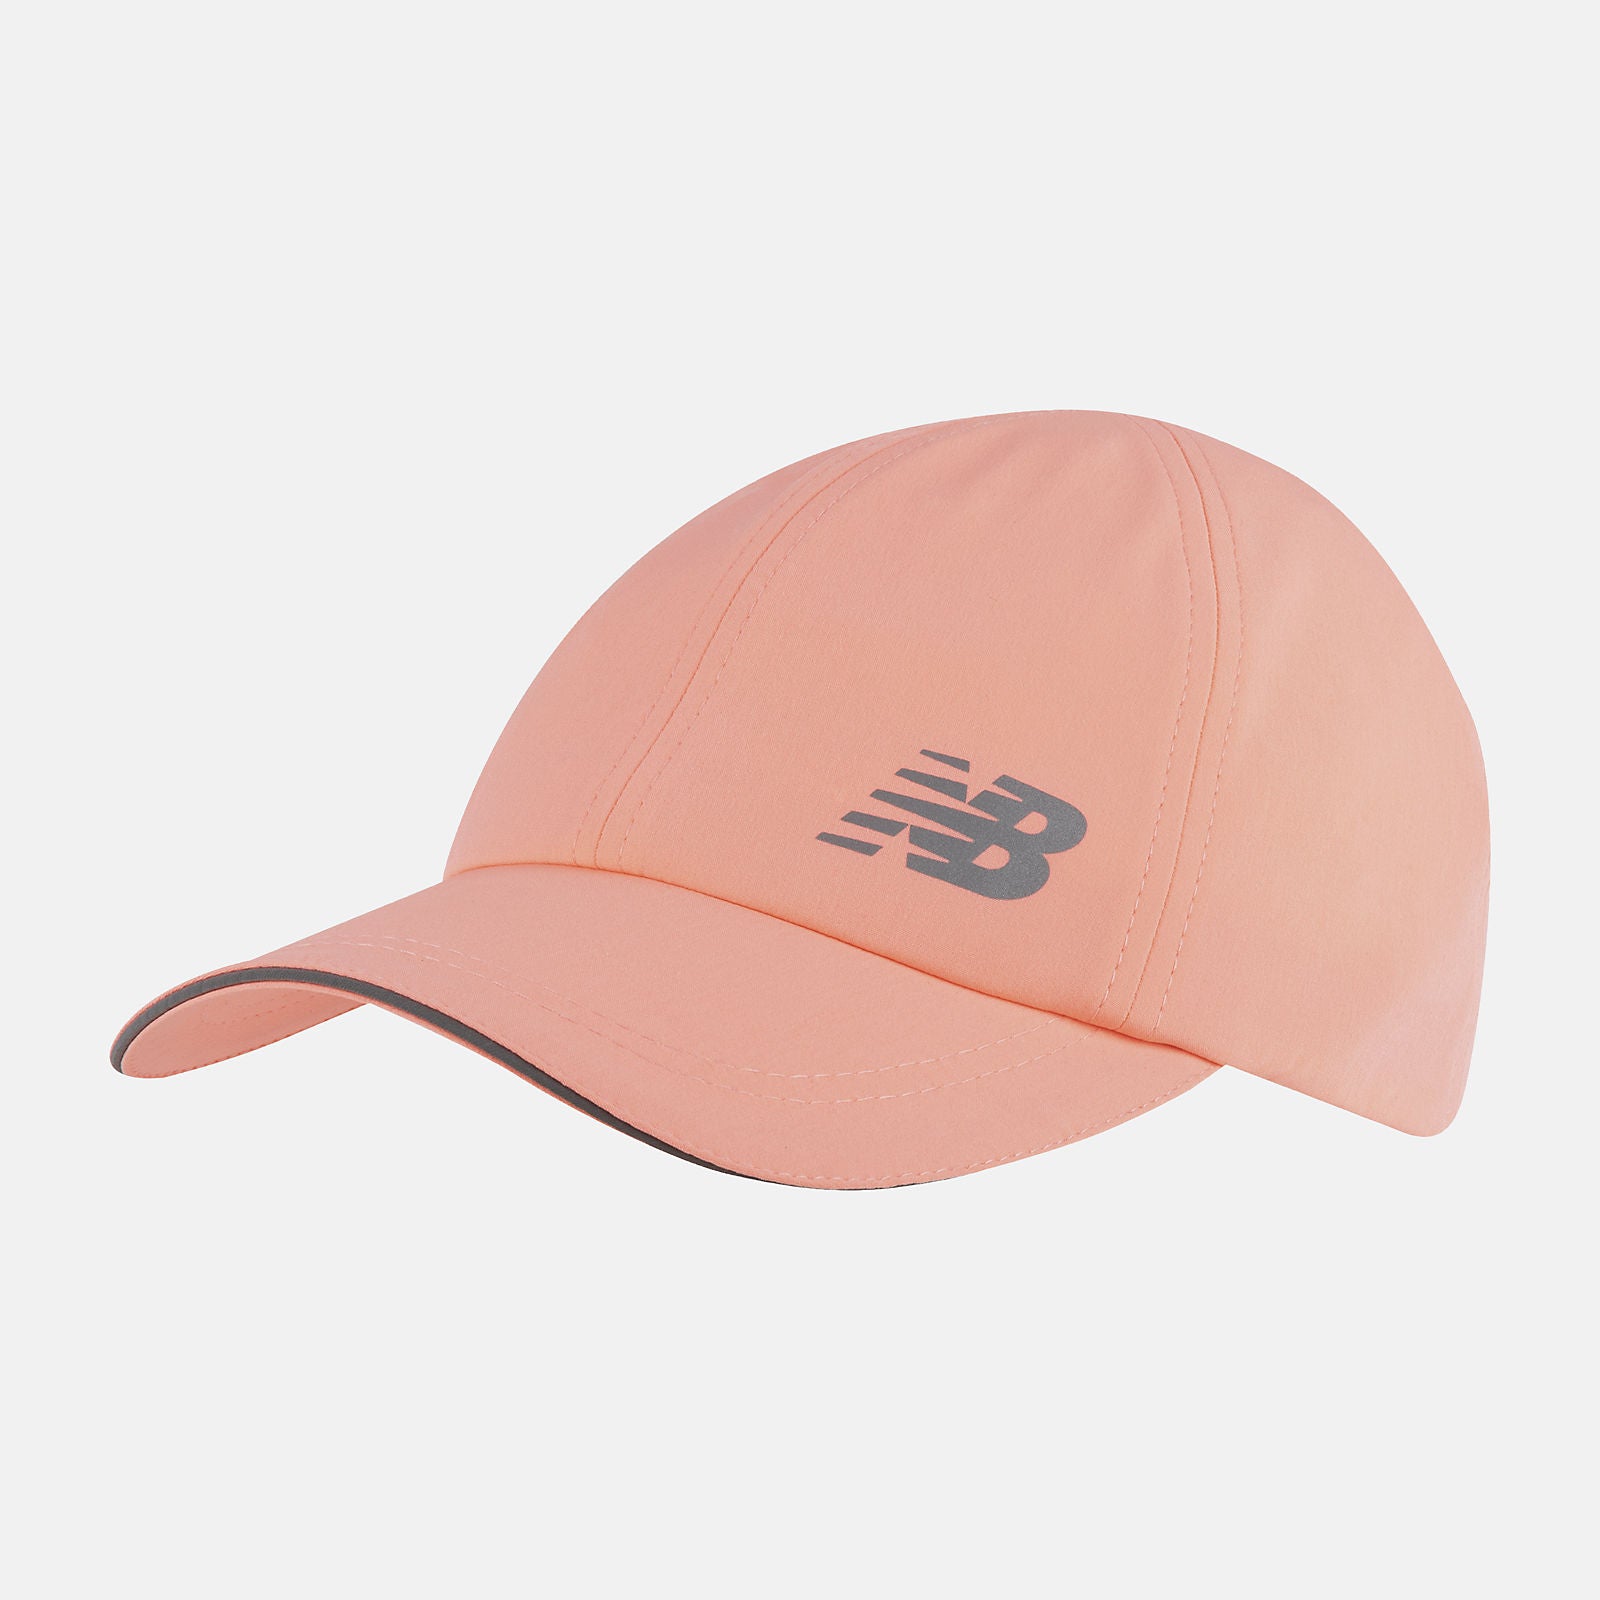 NEW BALANCE Women's High Pony Performance Hat in Grapefruit LAH21103 O/S GRAPEFRUIT FROM EIGHTYWINGOLD - OFFICIAL BRAND PARTNER